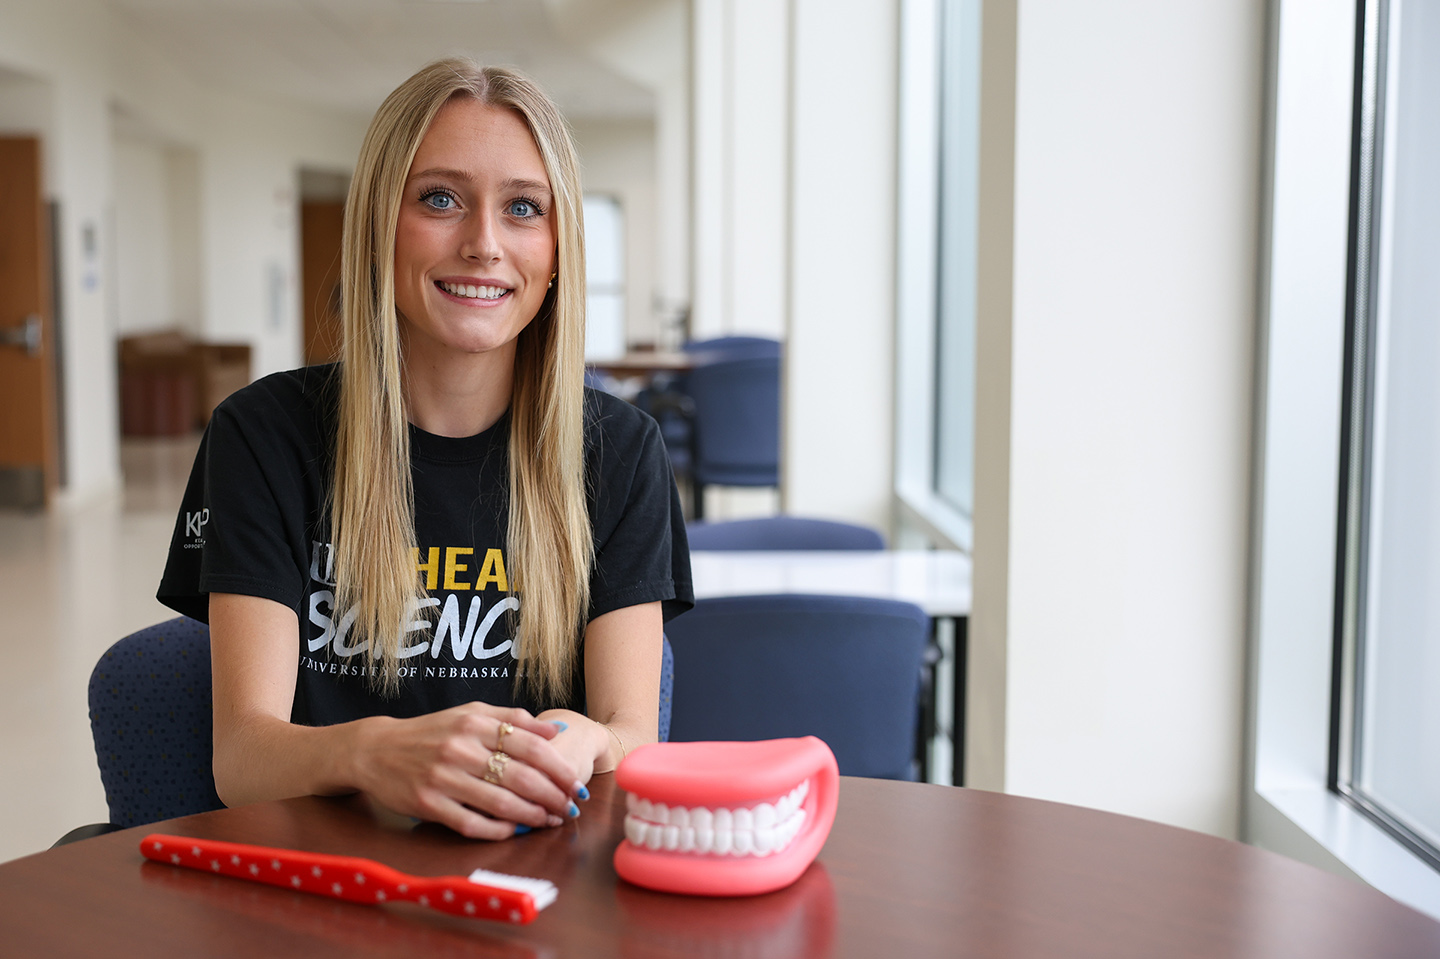 Mara Hemmer is a soon-to-be senior at UNK, where she’s studying biology as part of the pre-dental program. (Photos by Erika Pritchard, UNK Communications)